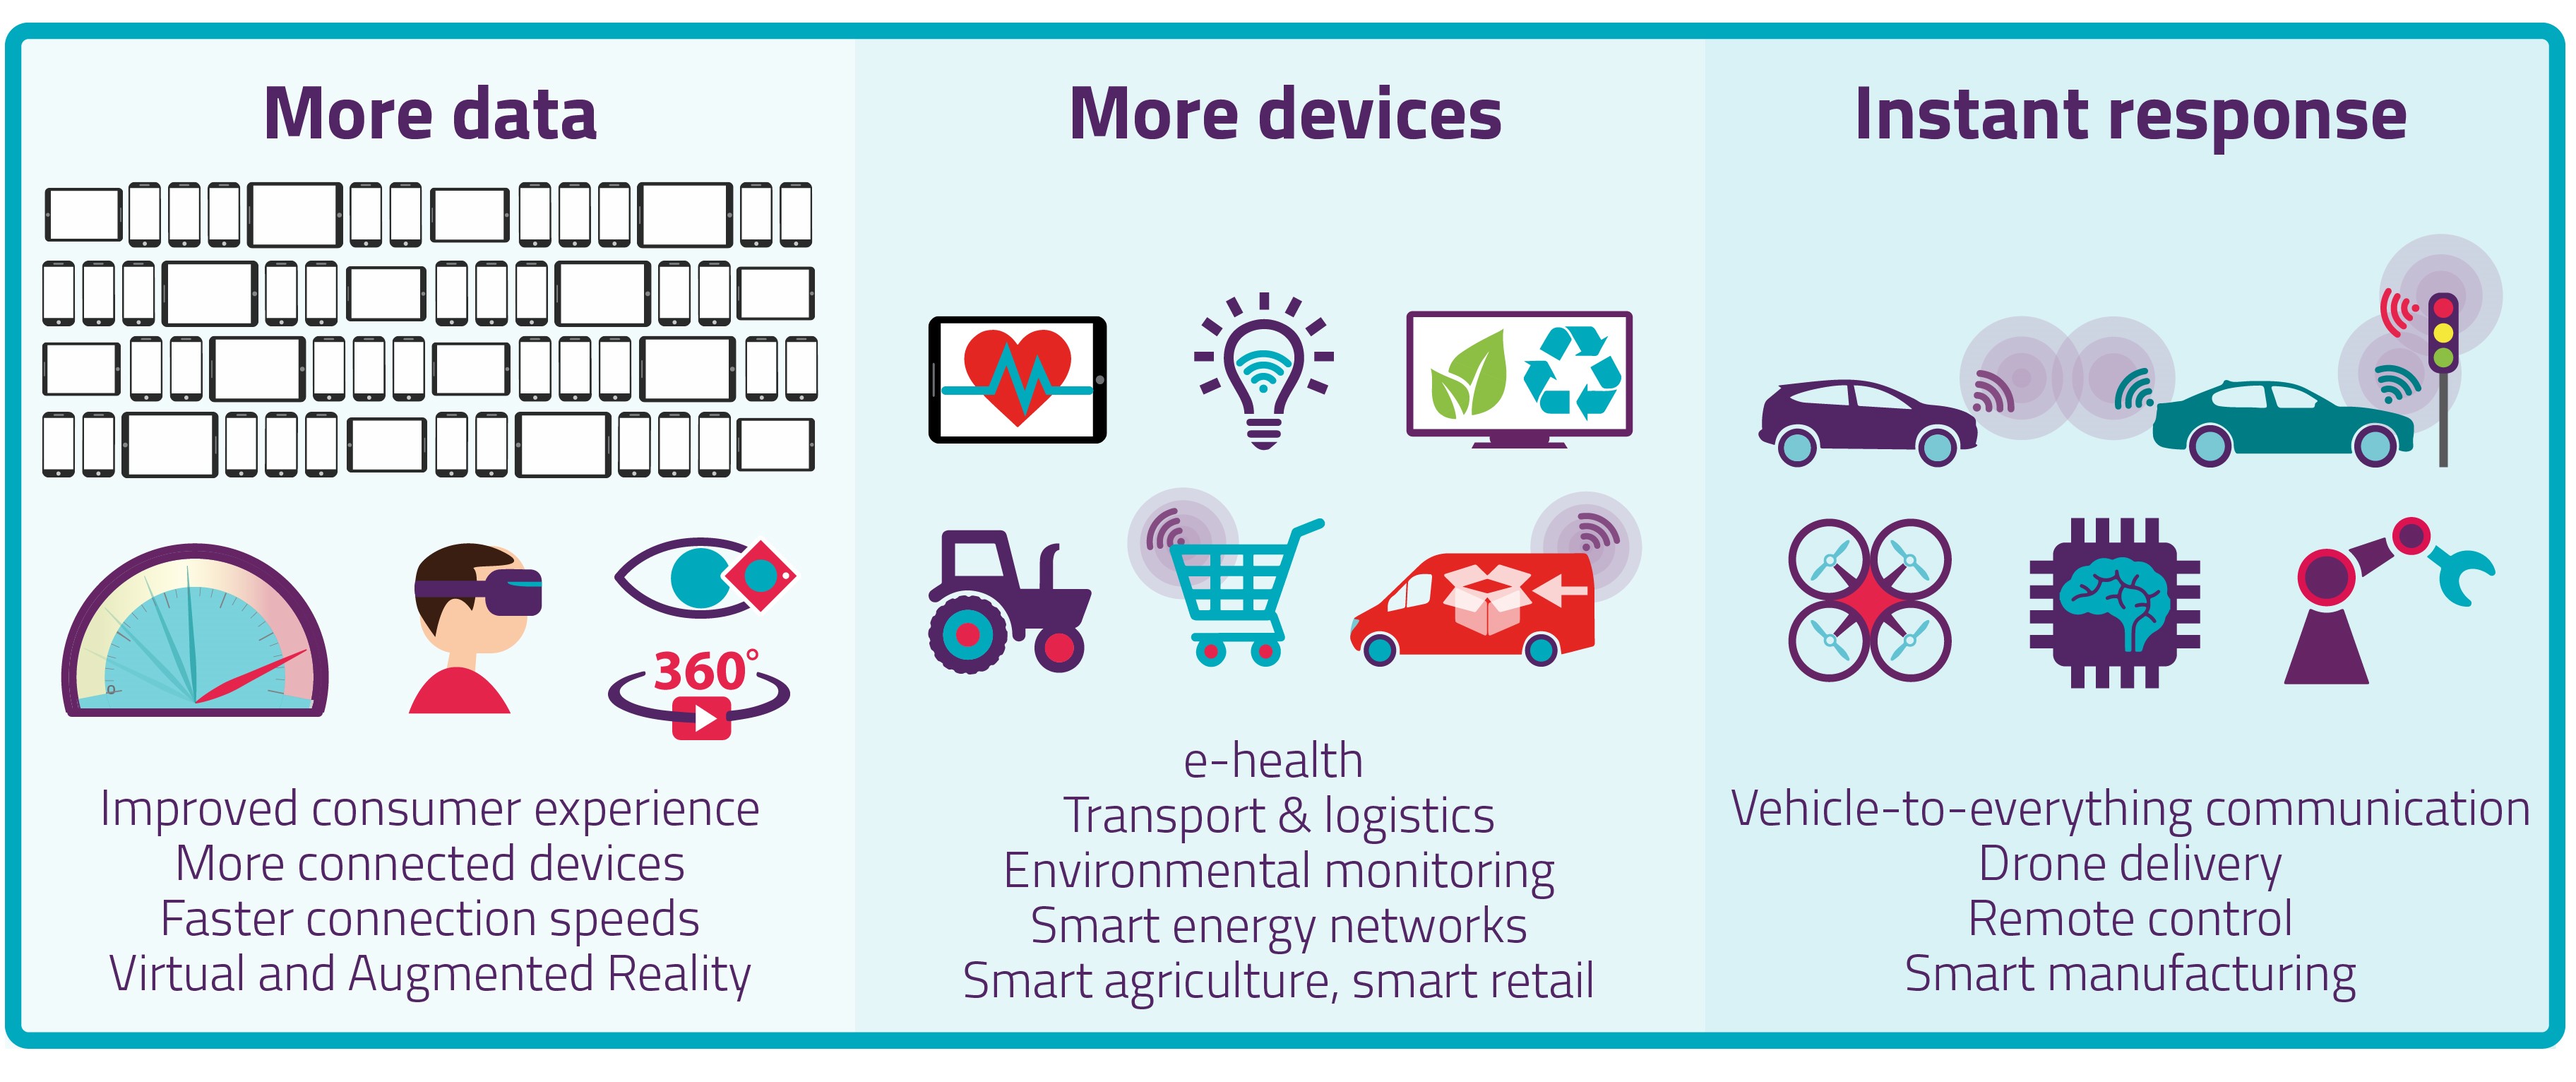 More data use cases include: improved consumer experience; more connected devices; faster connection speeds; virtual and augmented reality  More devices use cases include: e-health; transport and logistics; environmental monitoring; smart energy networks; smart agriculture and smart retail  Instand response use cases include: Vehicle-to-everything communications; drone delivery; remote control; smart manufacturing